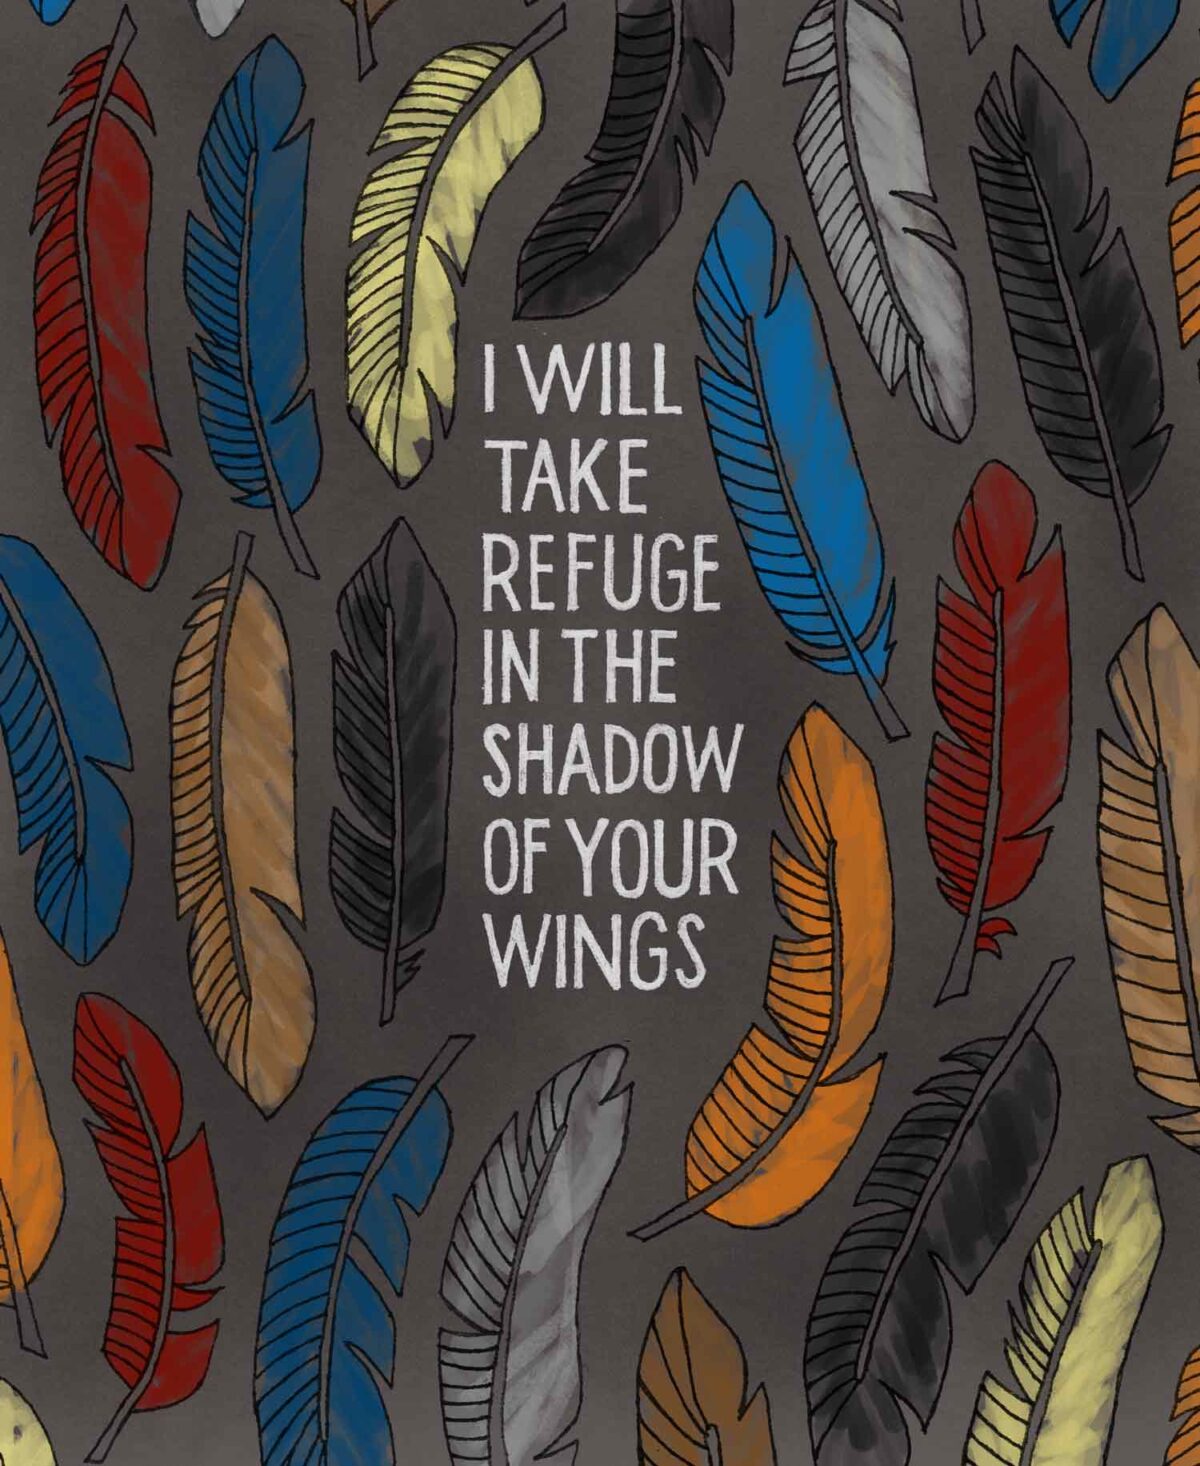 Psalm 57 Hand lettering and Illustration of feathers with lettering that reads: I will take refuge i nthe shadow of your wings.